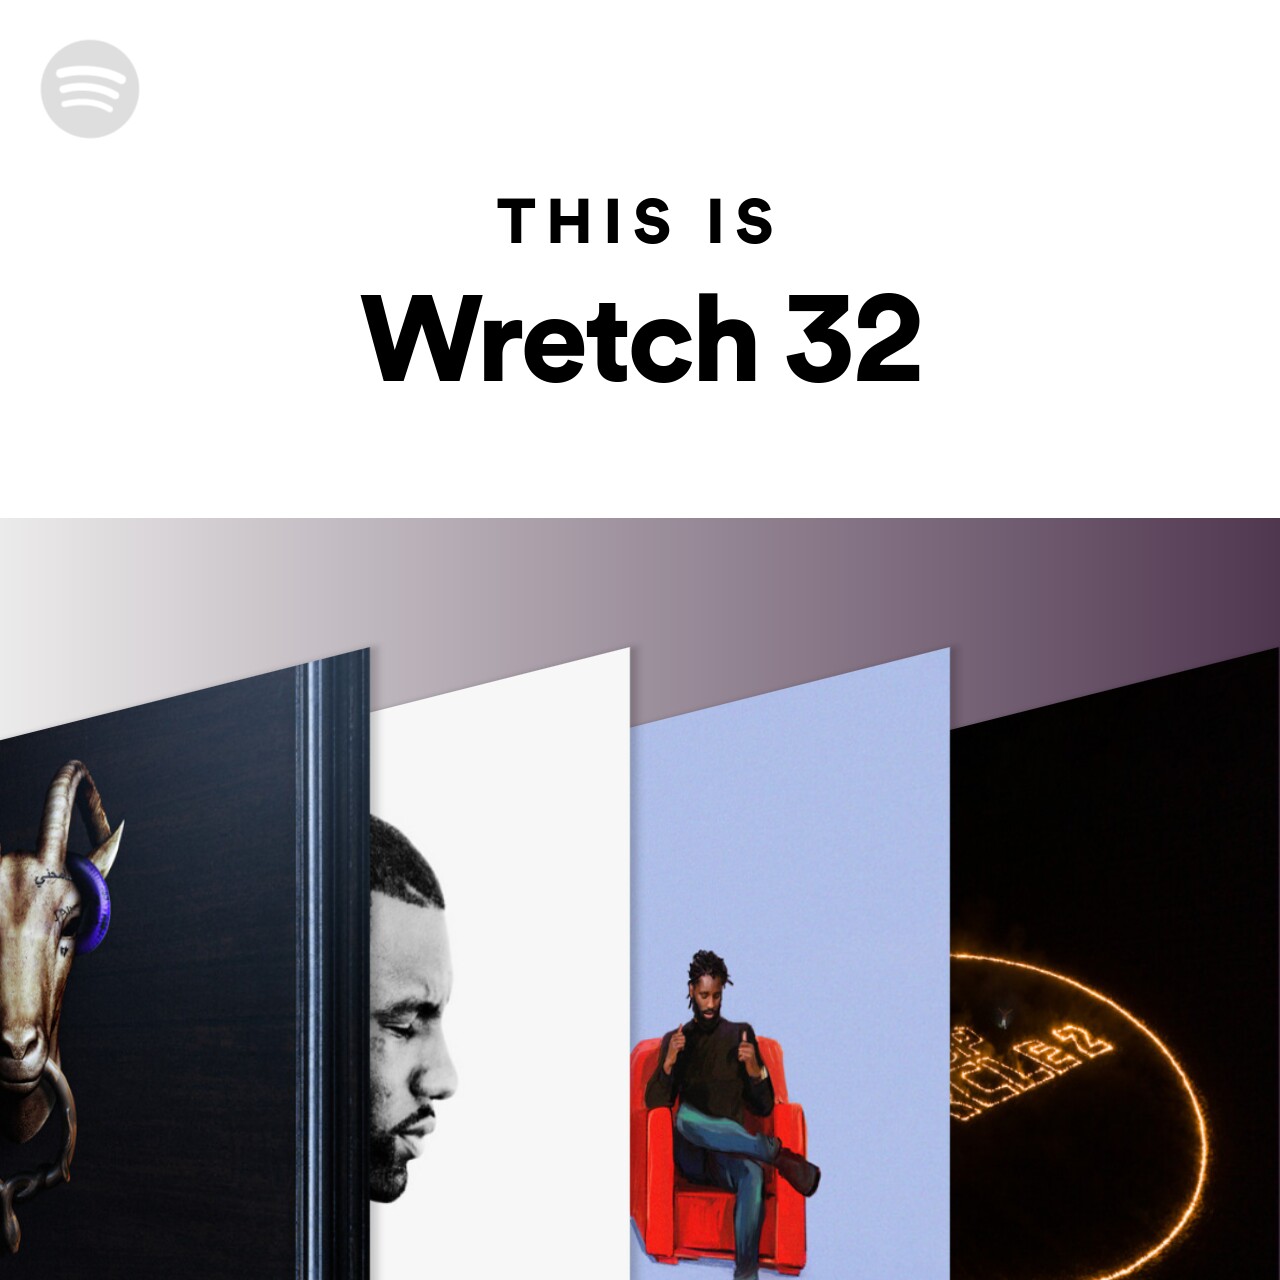 This Is Wretch 32